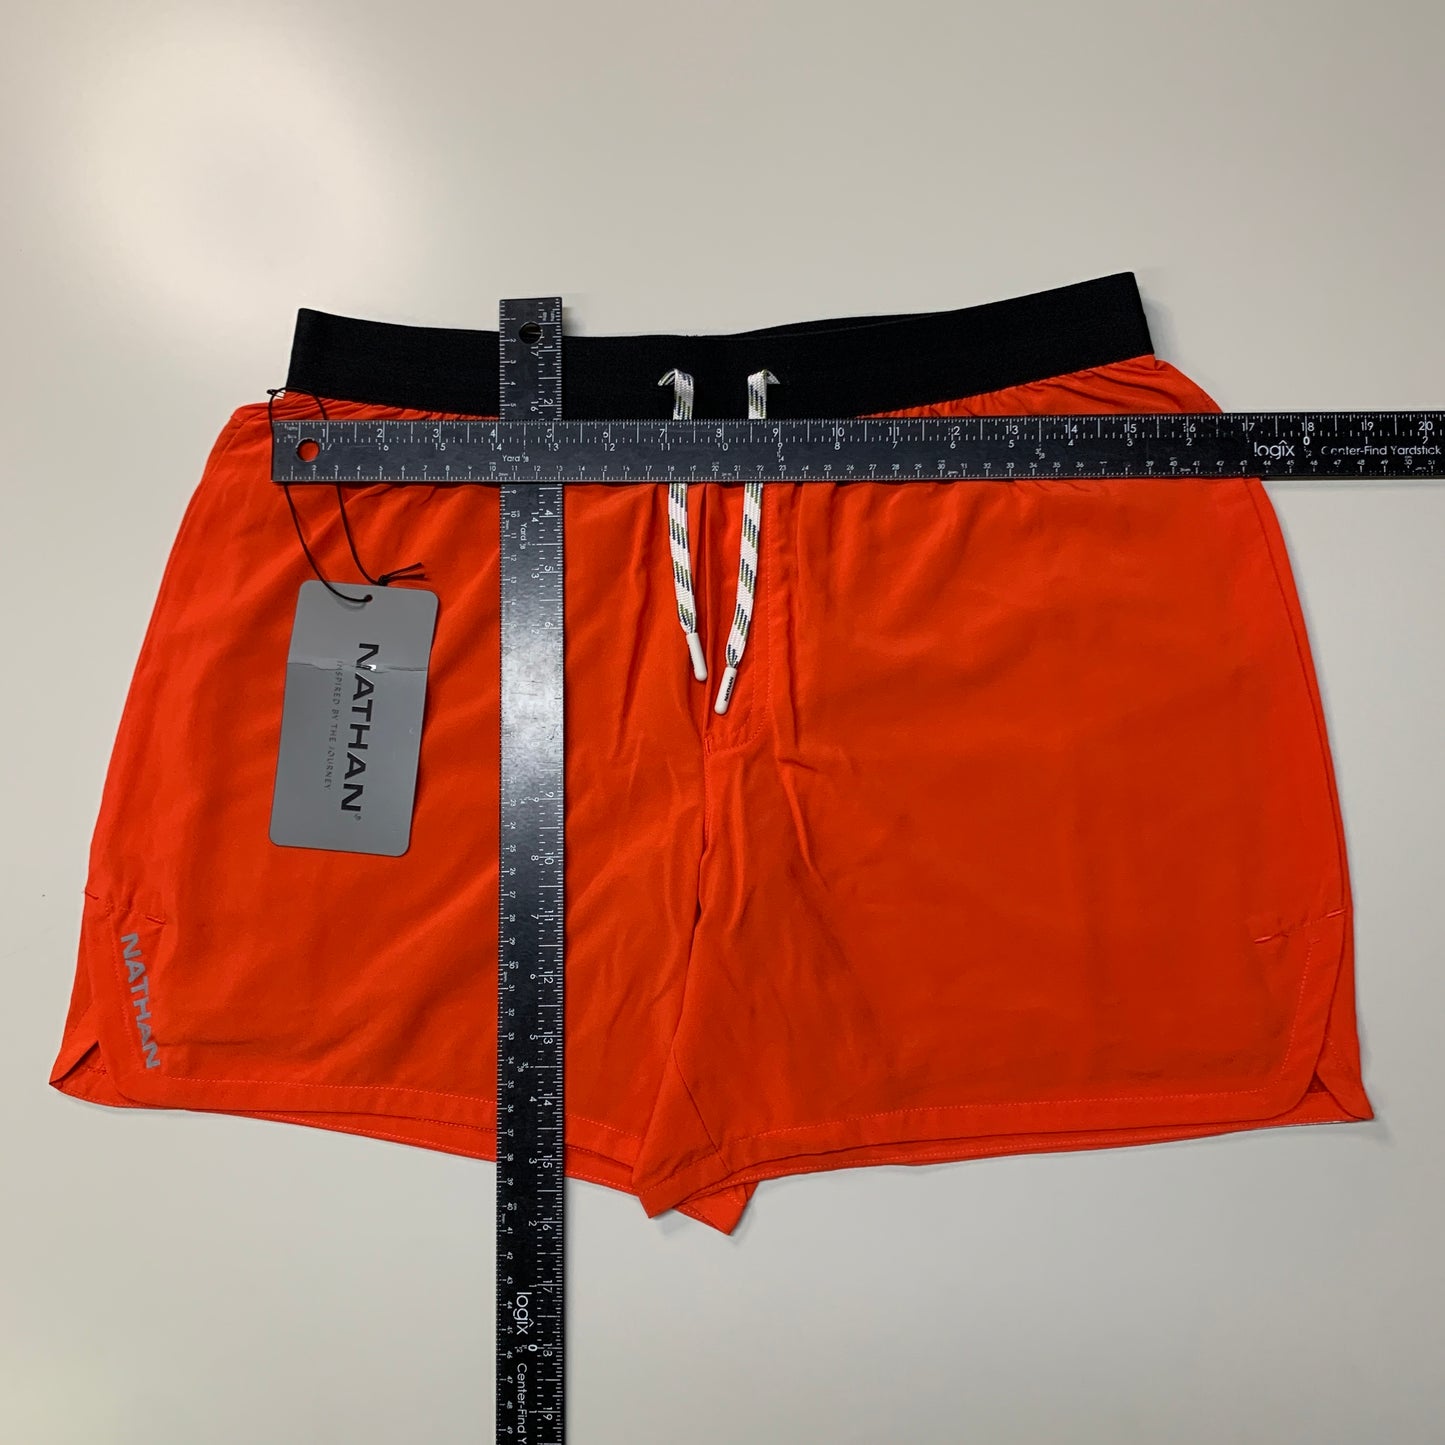 NATHAN Front Runner Shorts 5" Inseam Men's Fiery Red Size M NS70100-20126-M